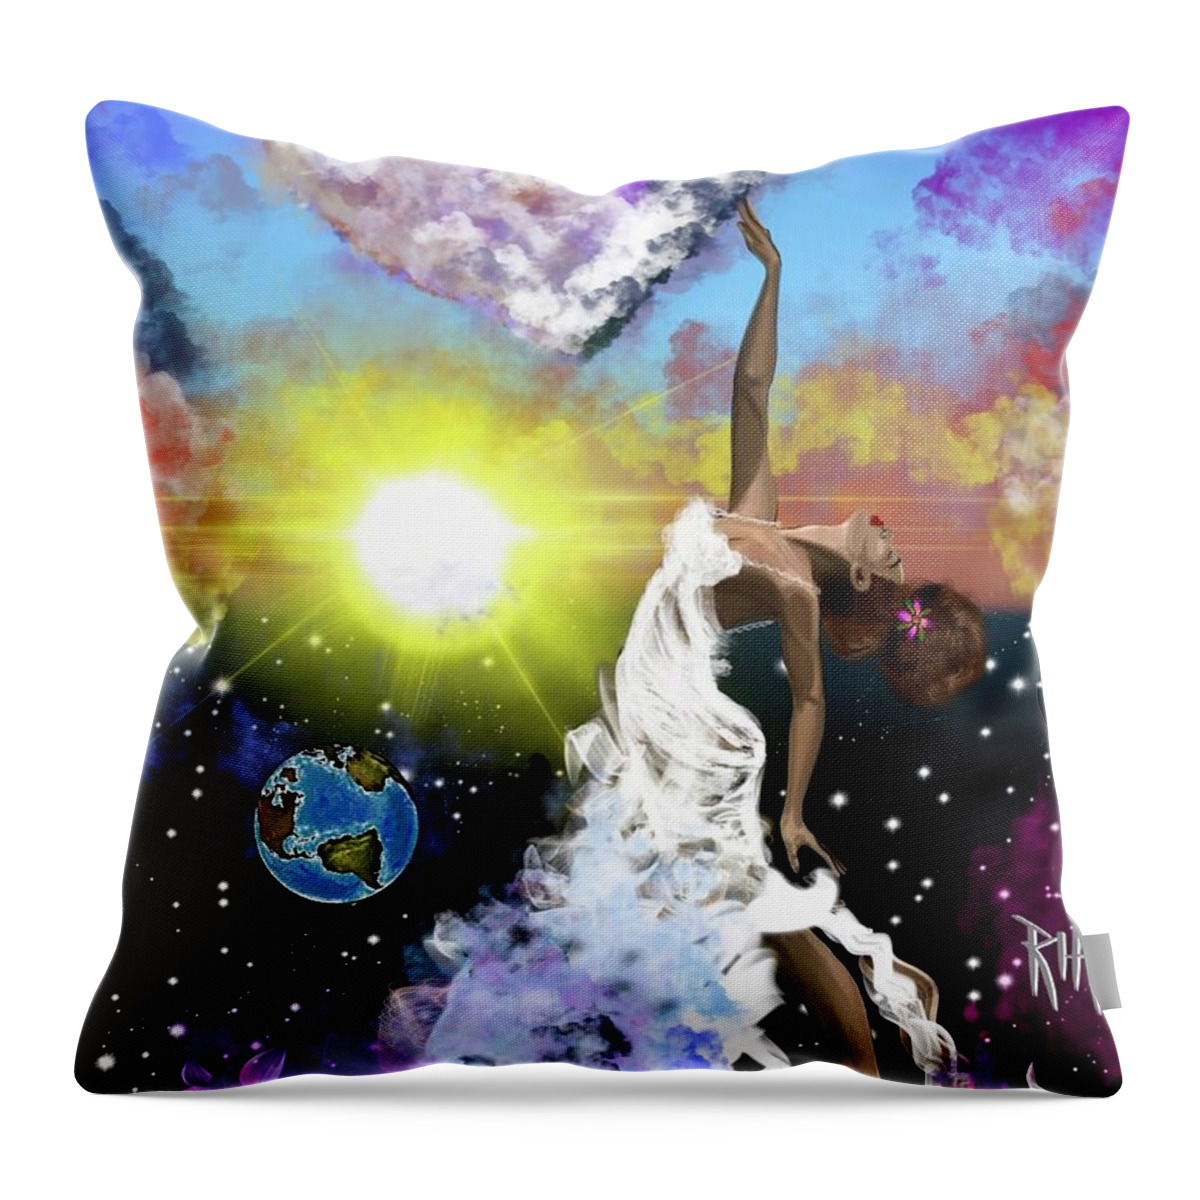  Throw Pillow featuring the painting Prayer before the Sun Sets by Artist RiA